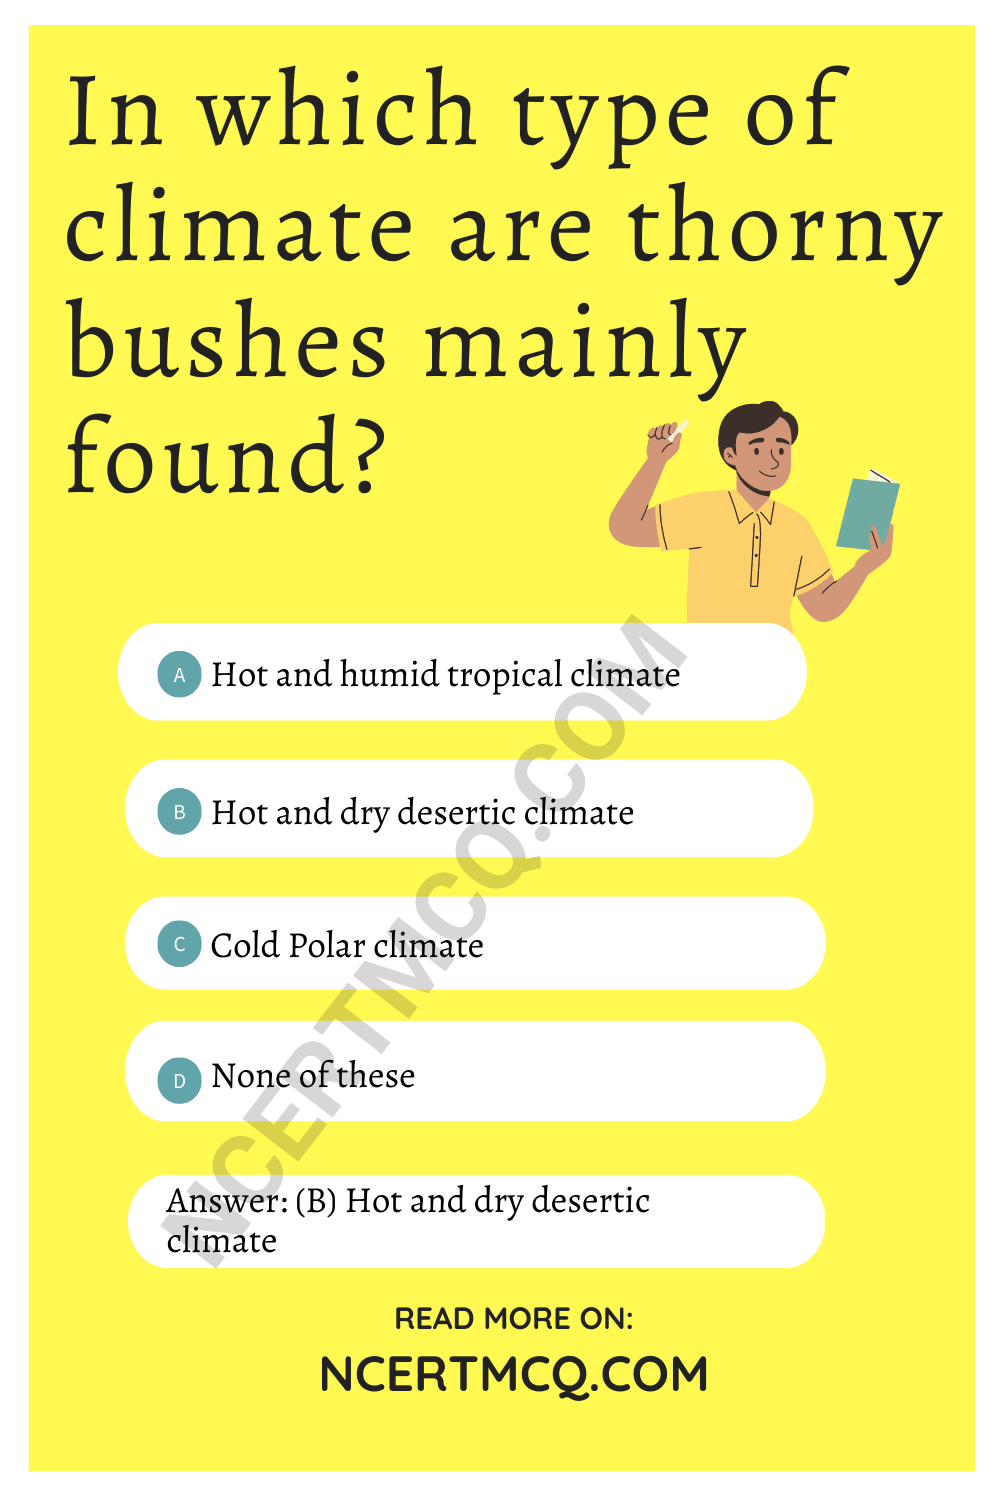 In which type of climate are thorny bushes mainly found?